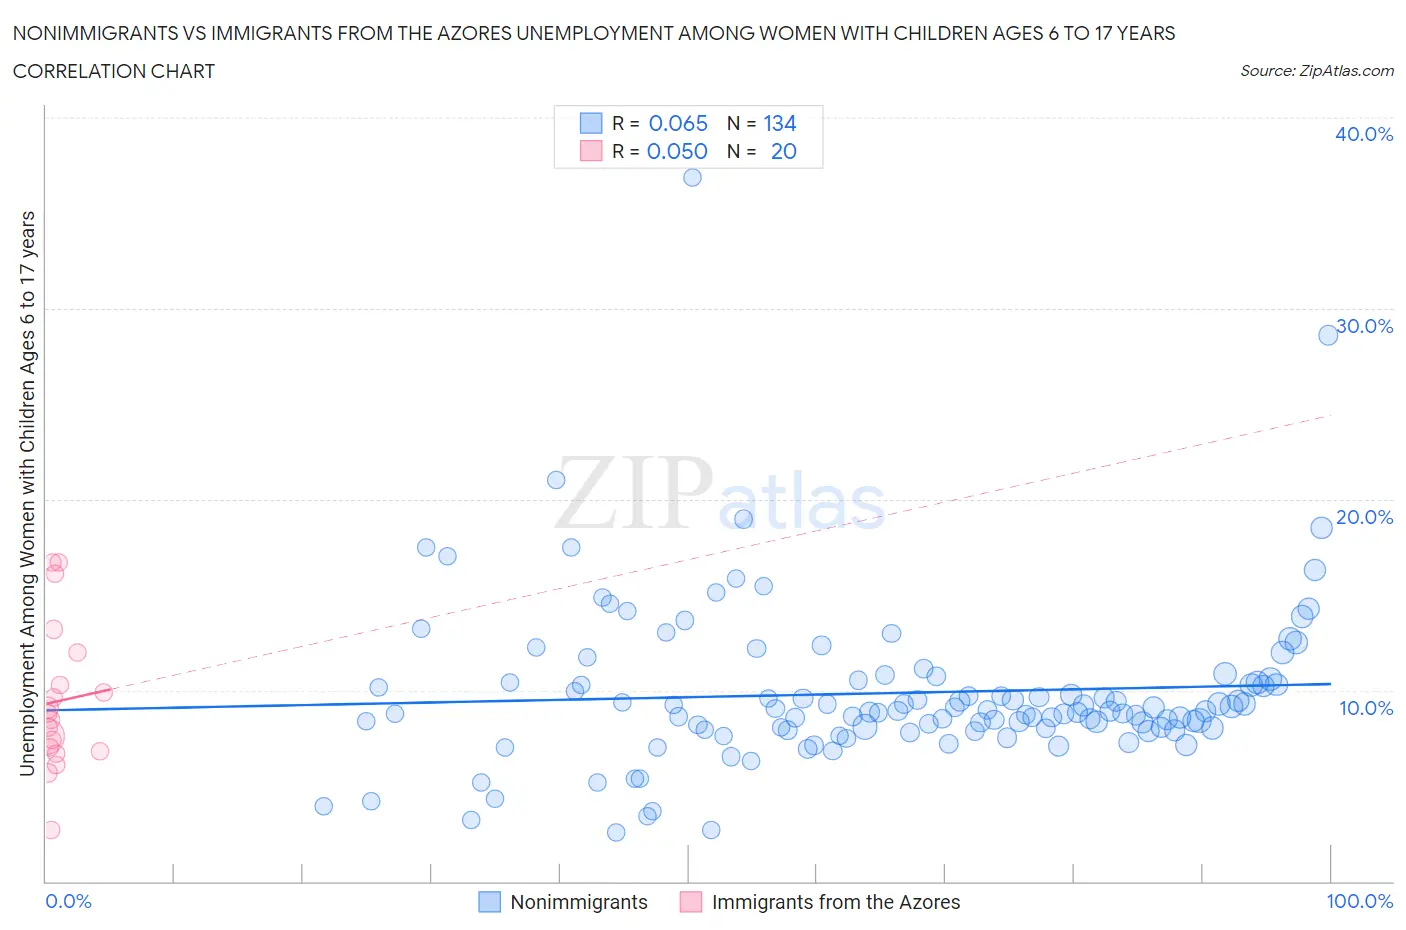 Nonimmigrants vs Immigrants from the Azores Unemployment Among Women with Children Ages 6 to 17 years